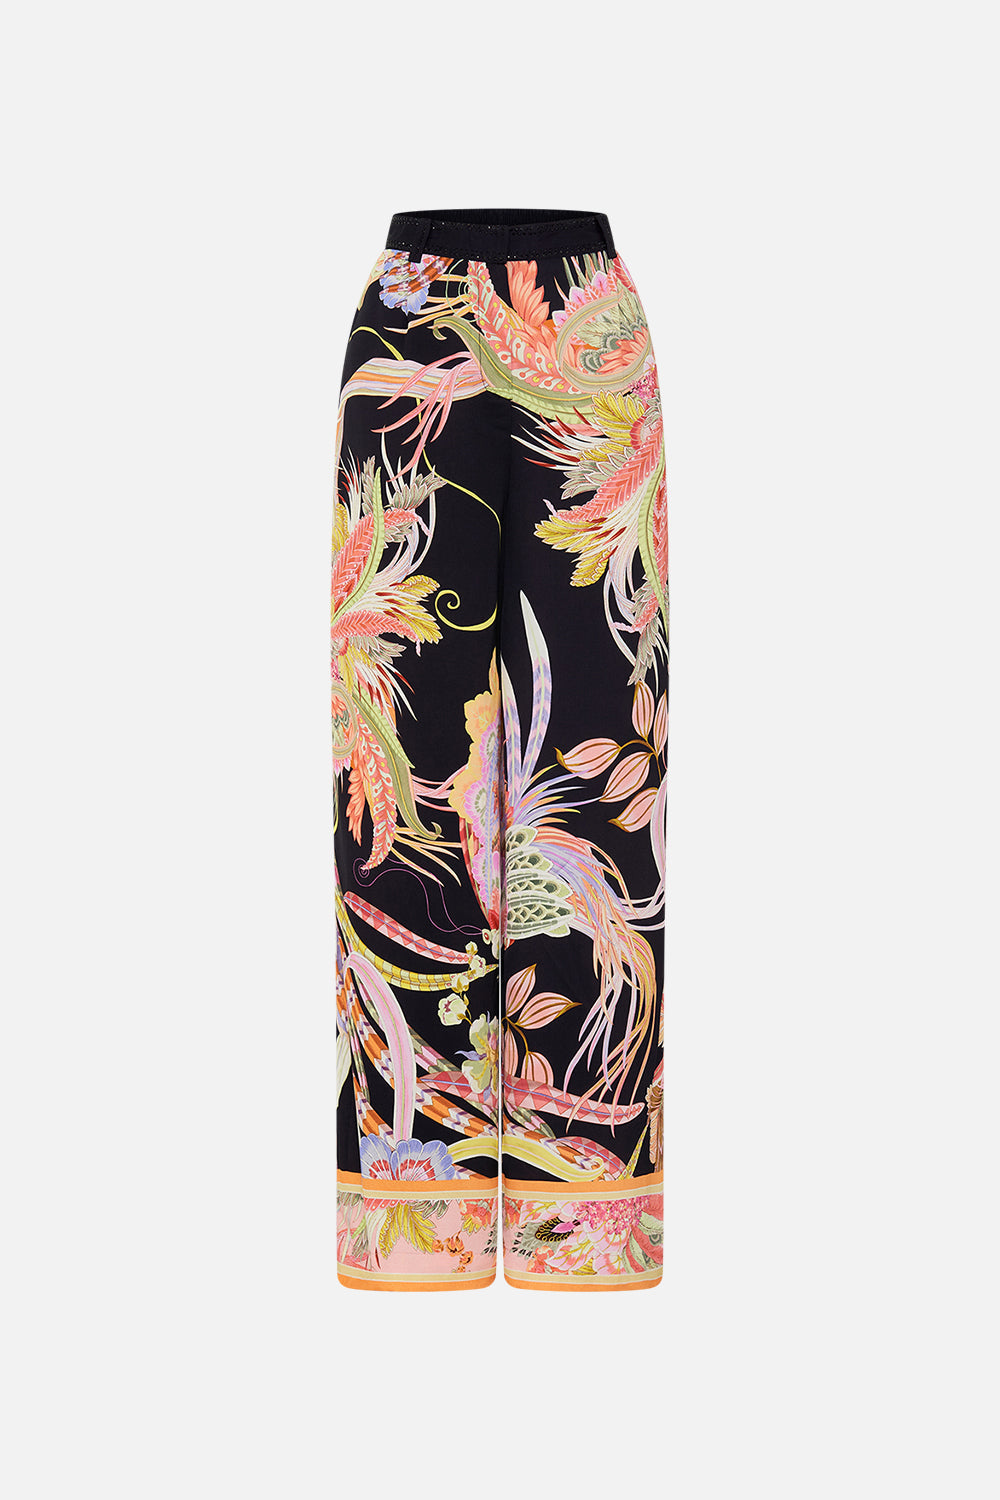 Product view of CAMILLA designer wide leg pants in Lady of The Moon print